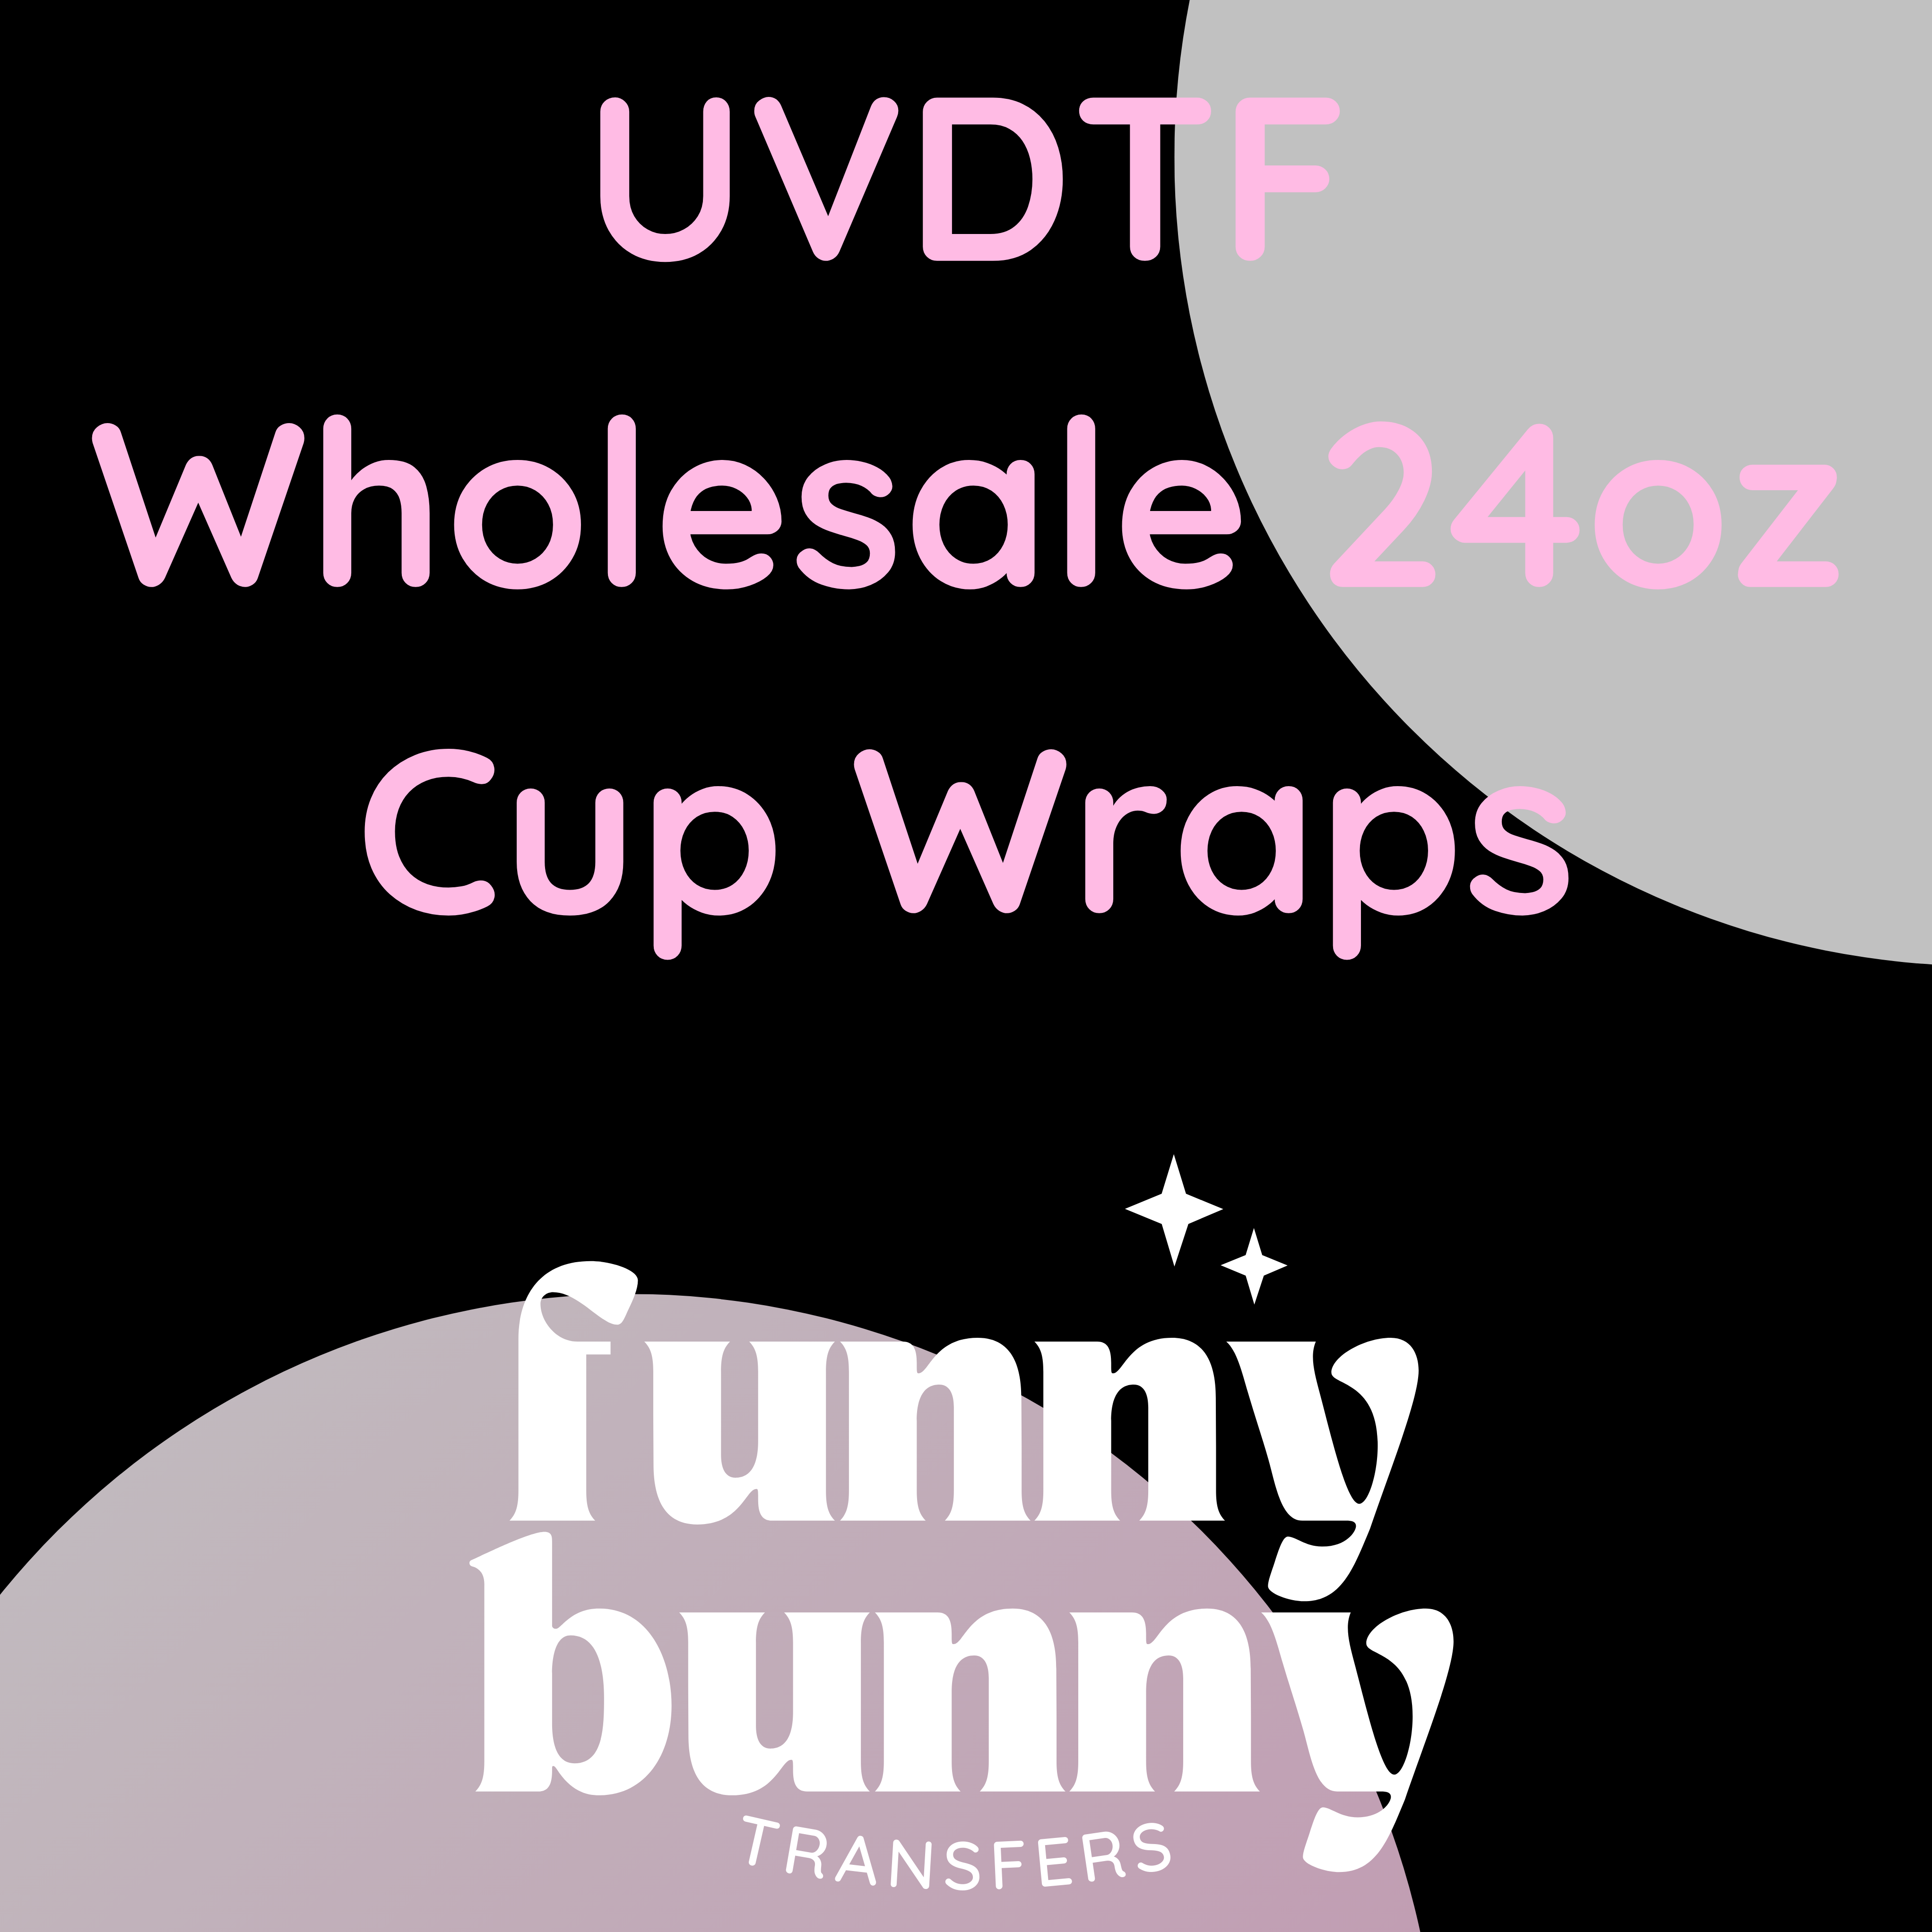 UV DTF Cup Wrap| Uv transfers| UV wraps| Permanent Decals| Ready to Apply|  Ready to Ship| 16oz cup wrap| Spooky Wraps| Halloween uvdtf